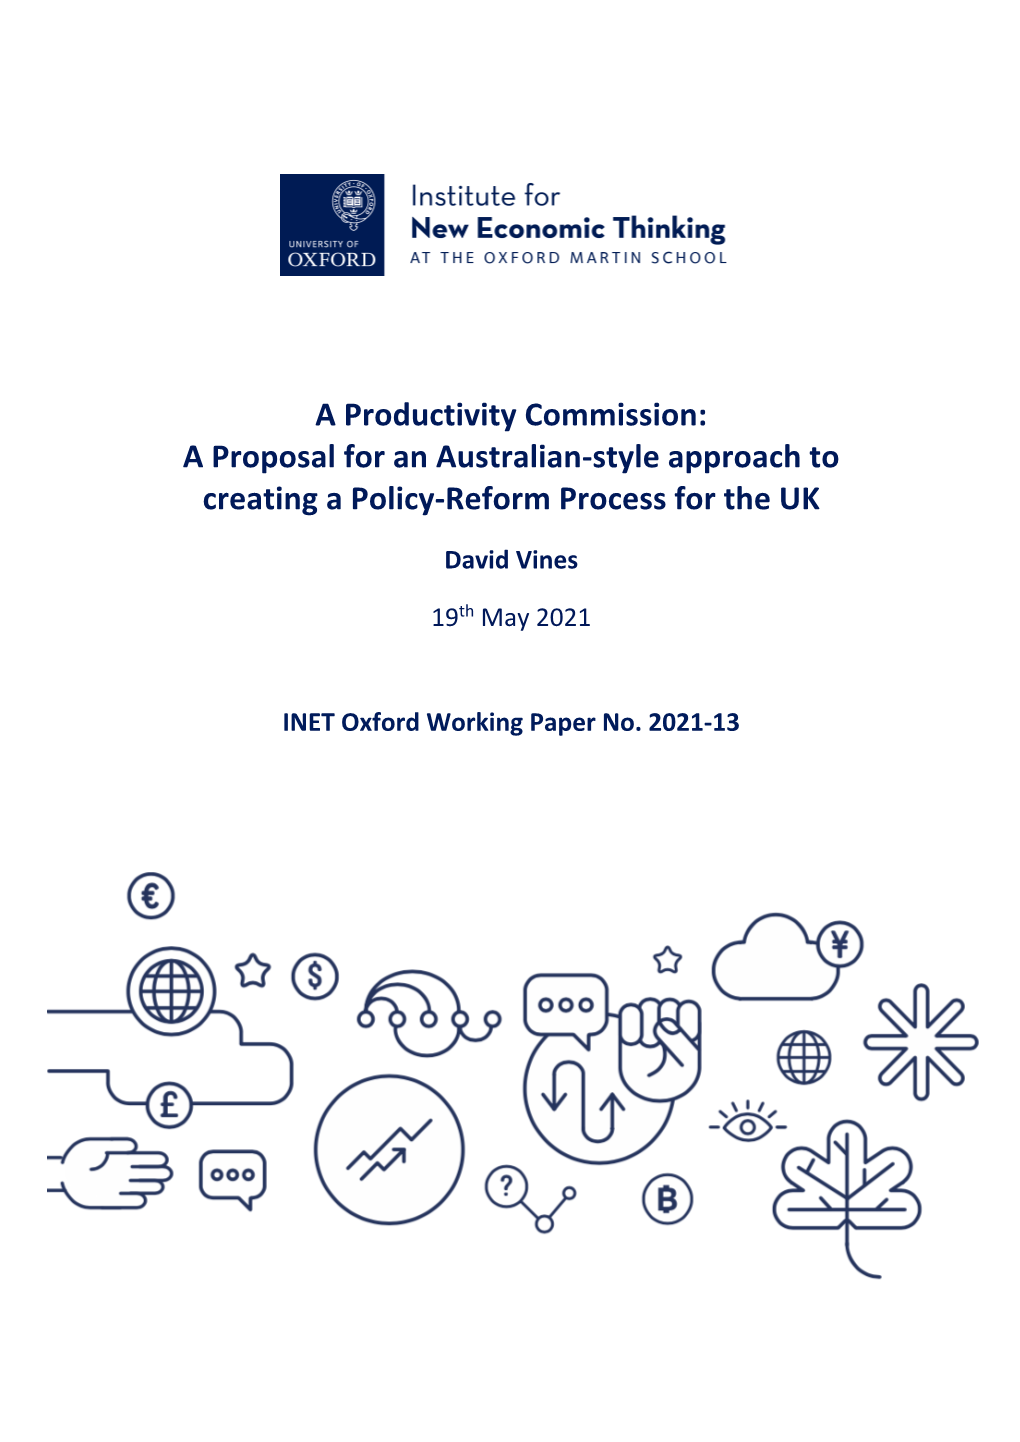 A Productivity Commission: a Proposal for an Australian-Style Approach to Creating a Policy-Reform Process for the UK